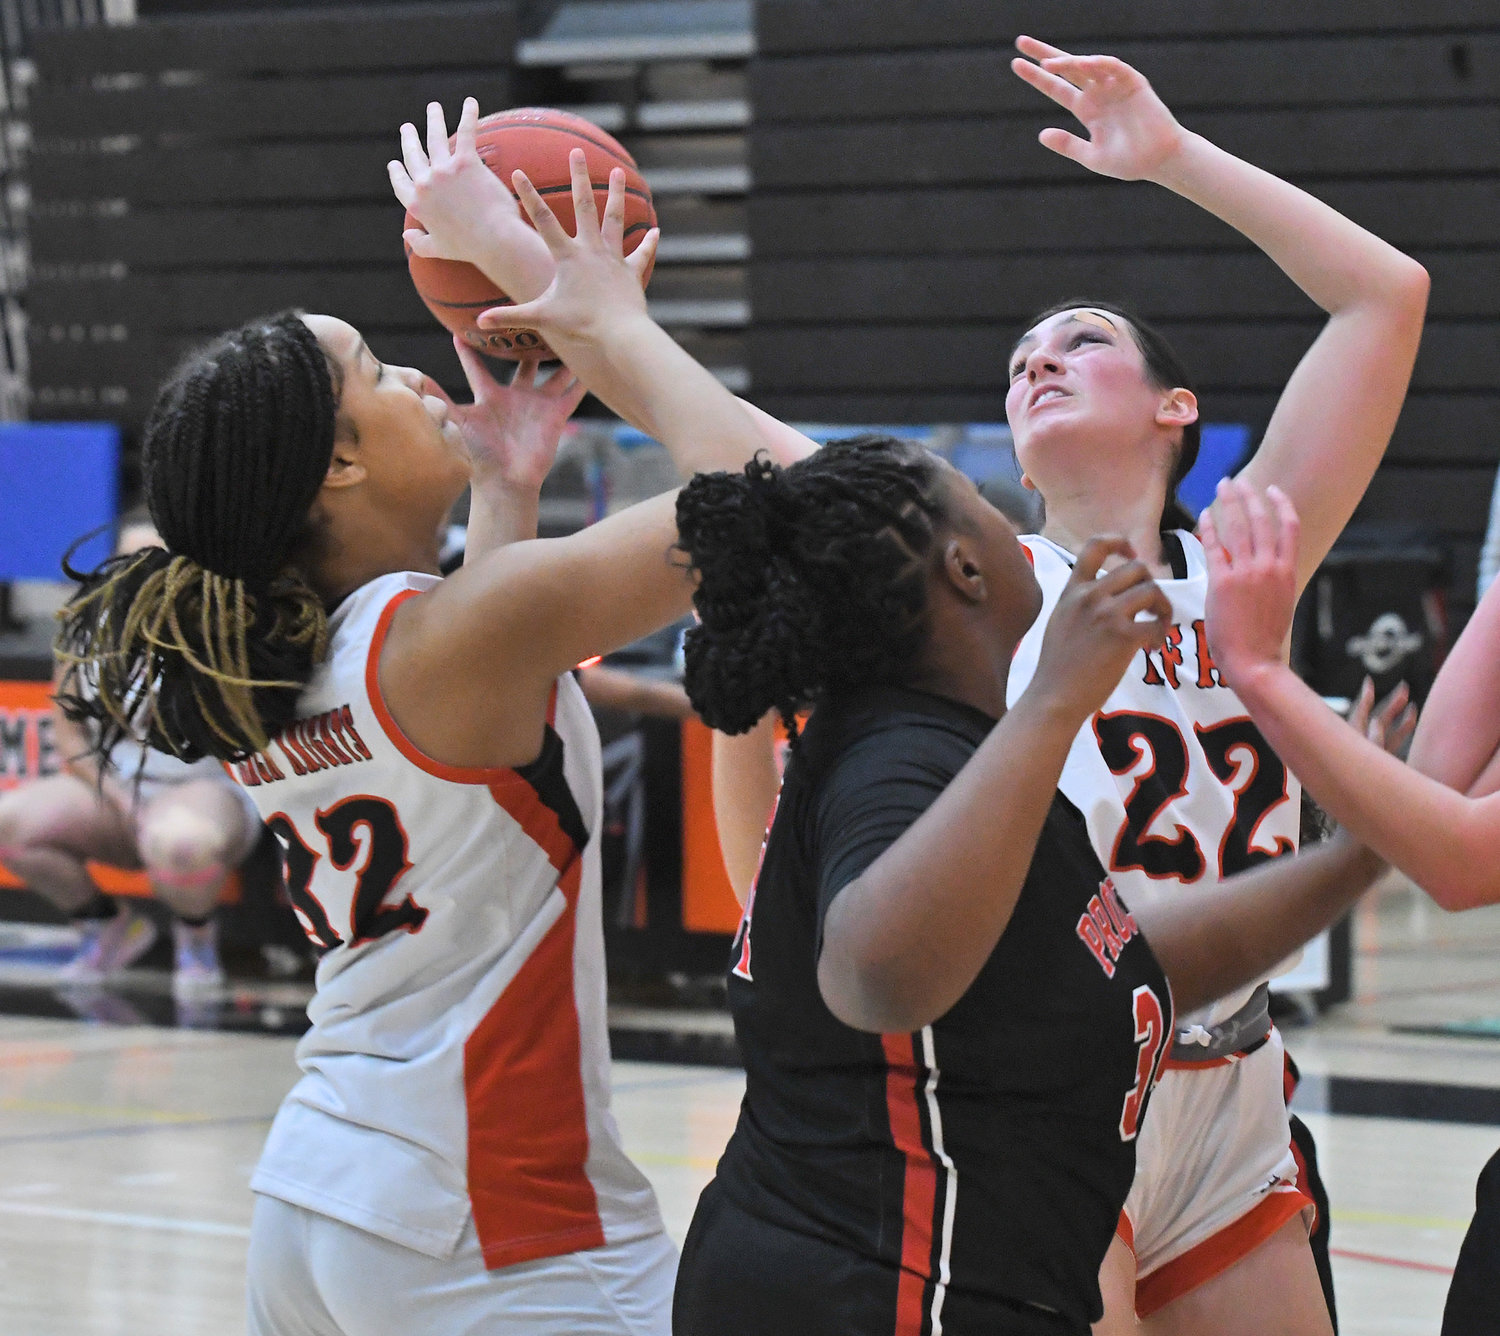 Rome Free Academy's Najae Matthews, left, and Mia Mirabelli, right, try to get control of the ball with Proctor's Anijah Buckingham in the middle Saturday at RFA. The Black Knights won 66-34 for a home victory in the Tri-Valley League.